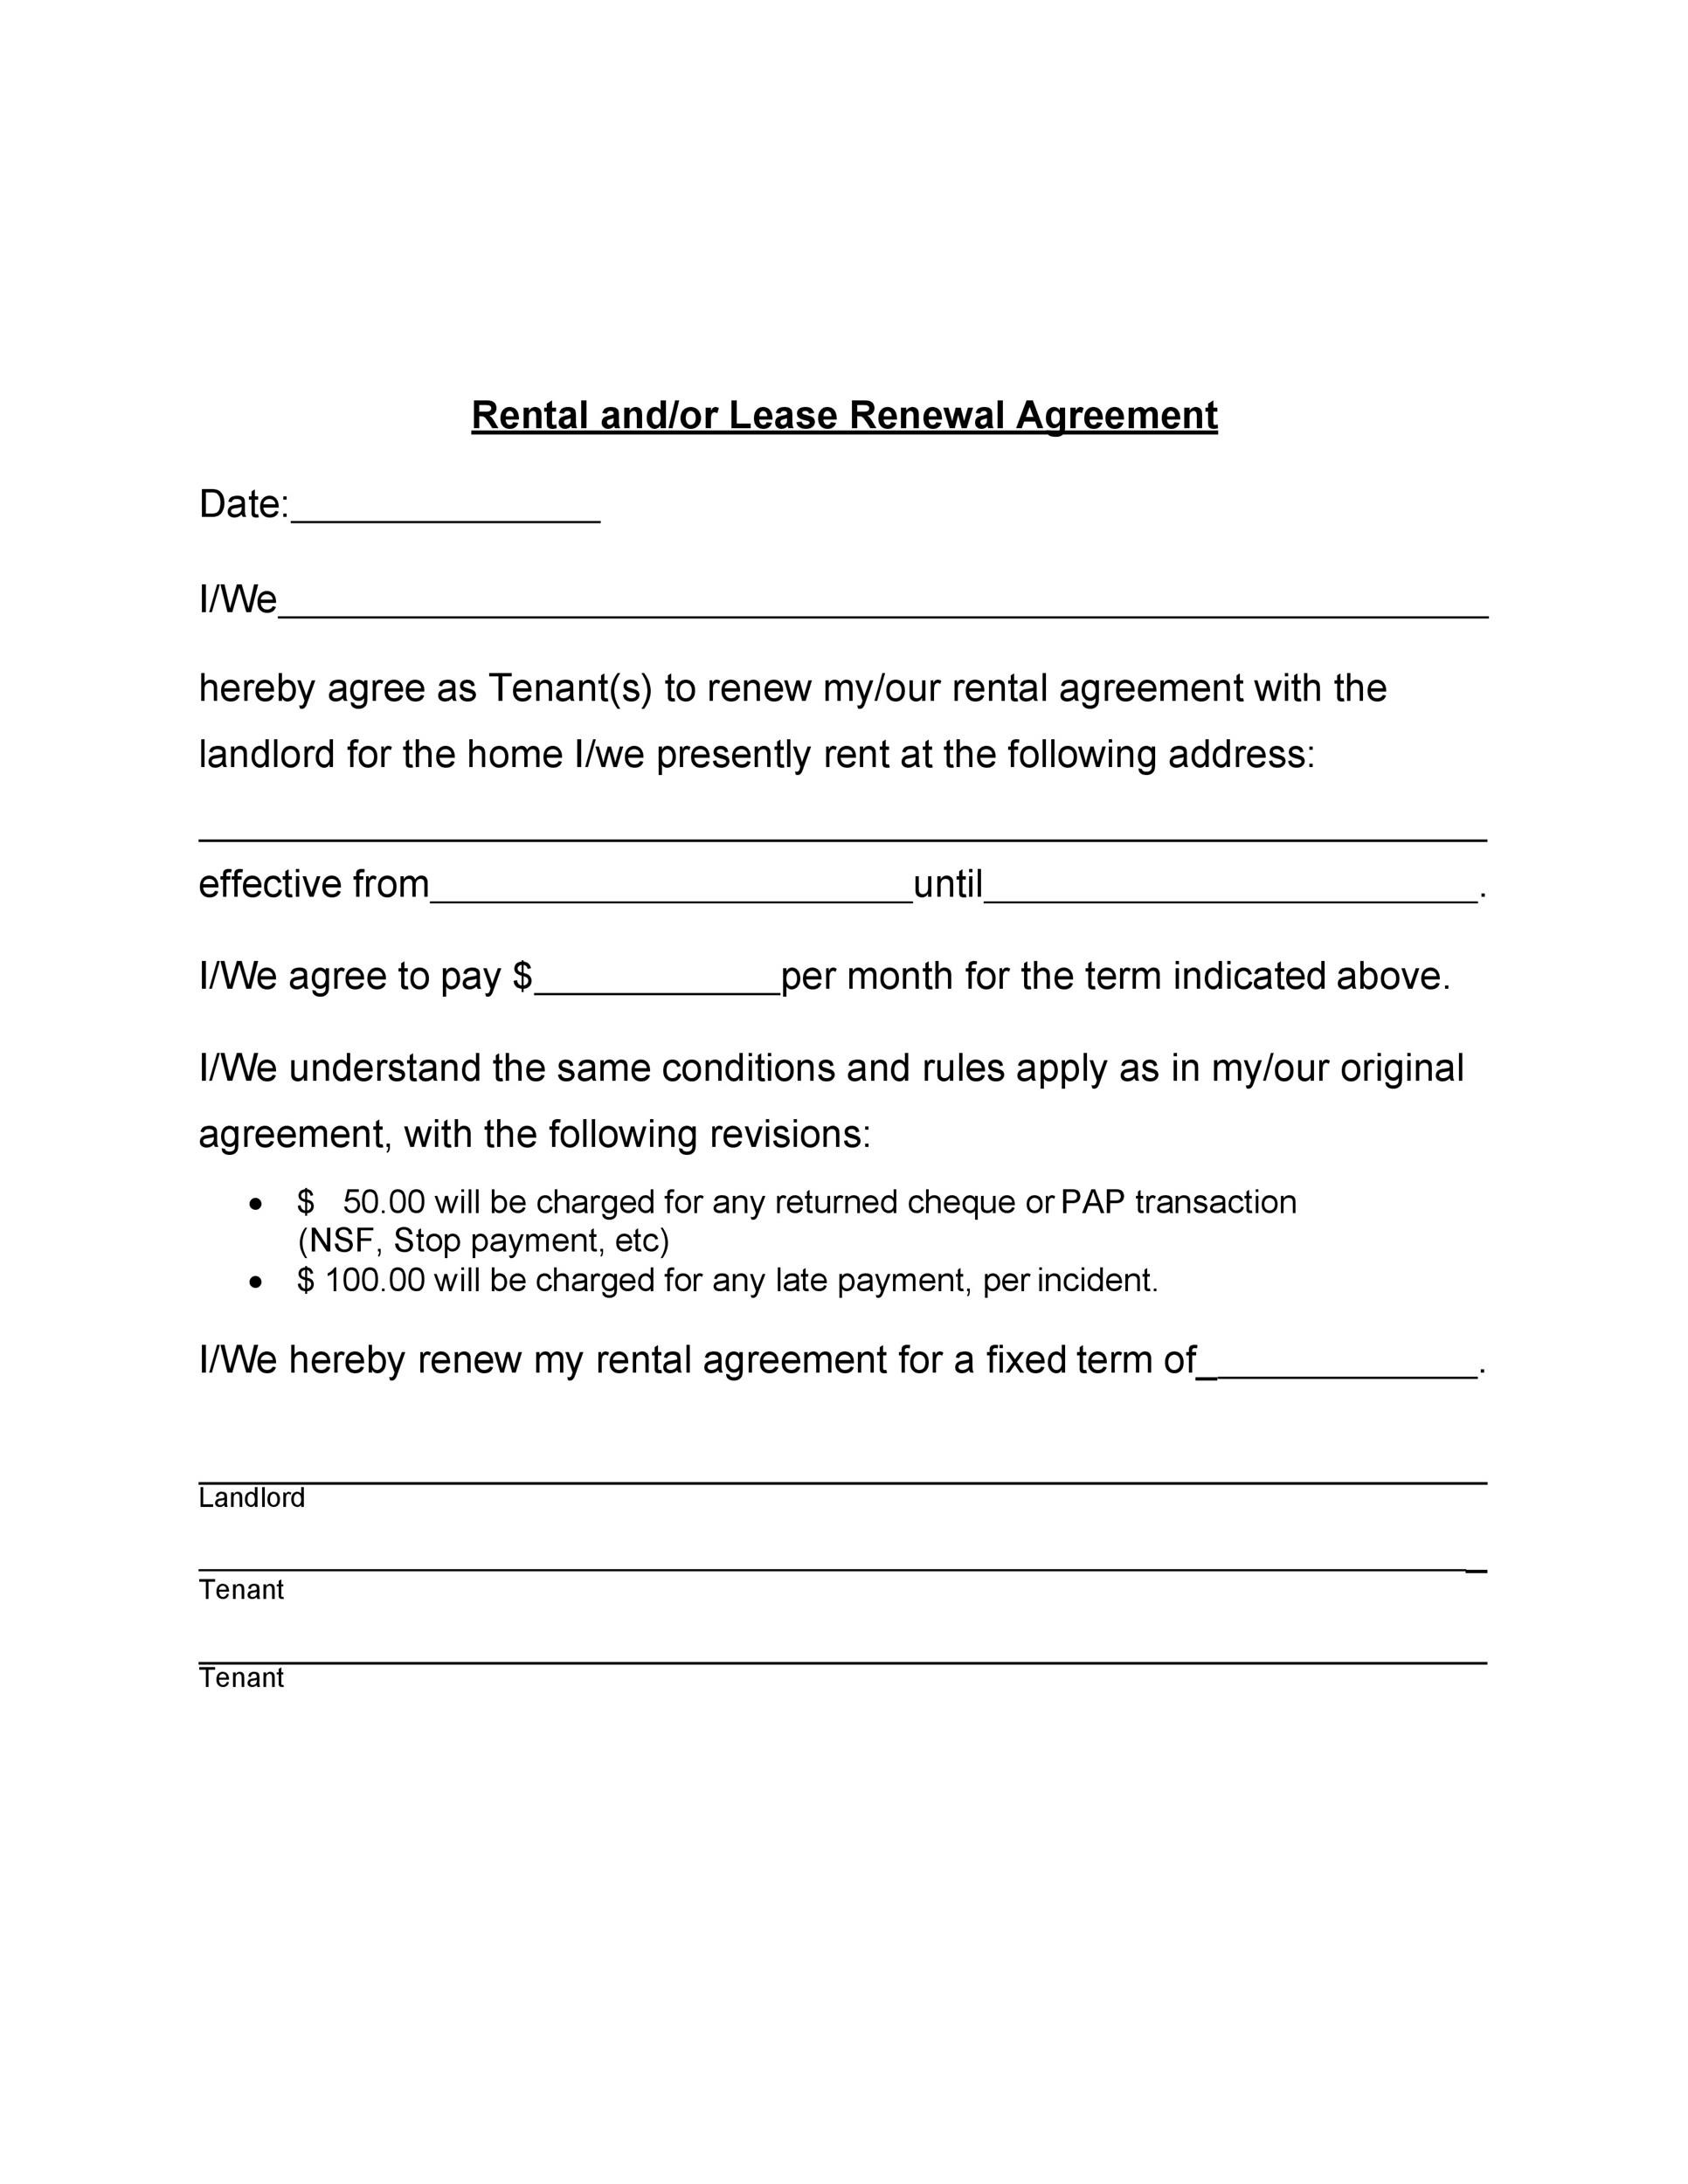 Rental House Agreement Letter from templatelab.com